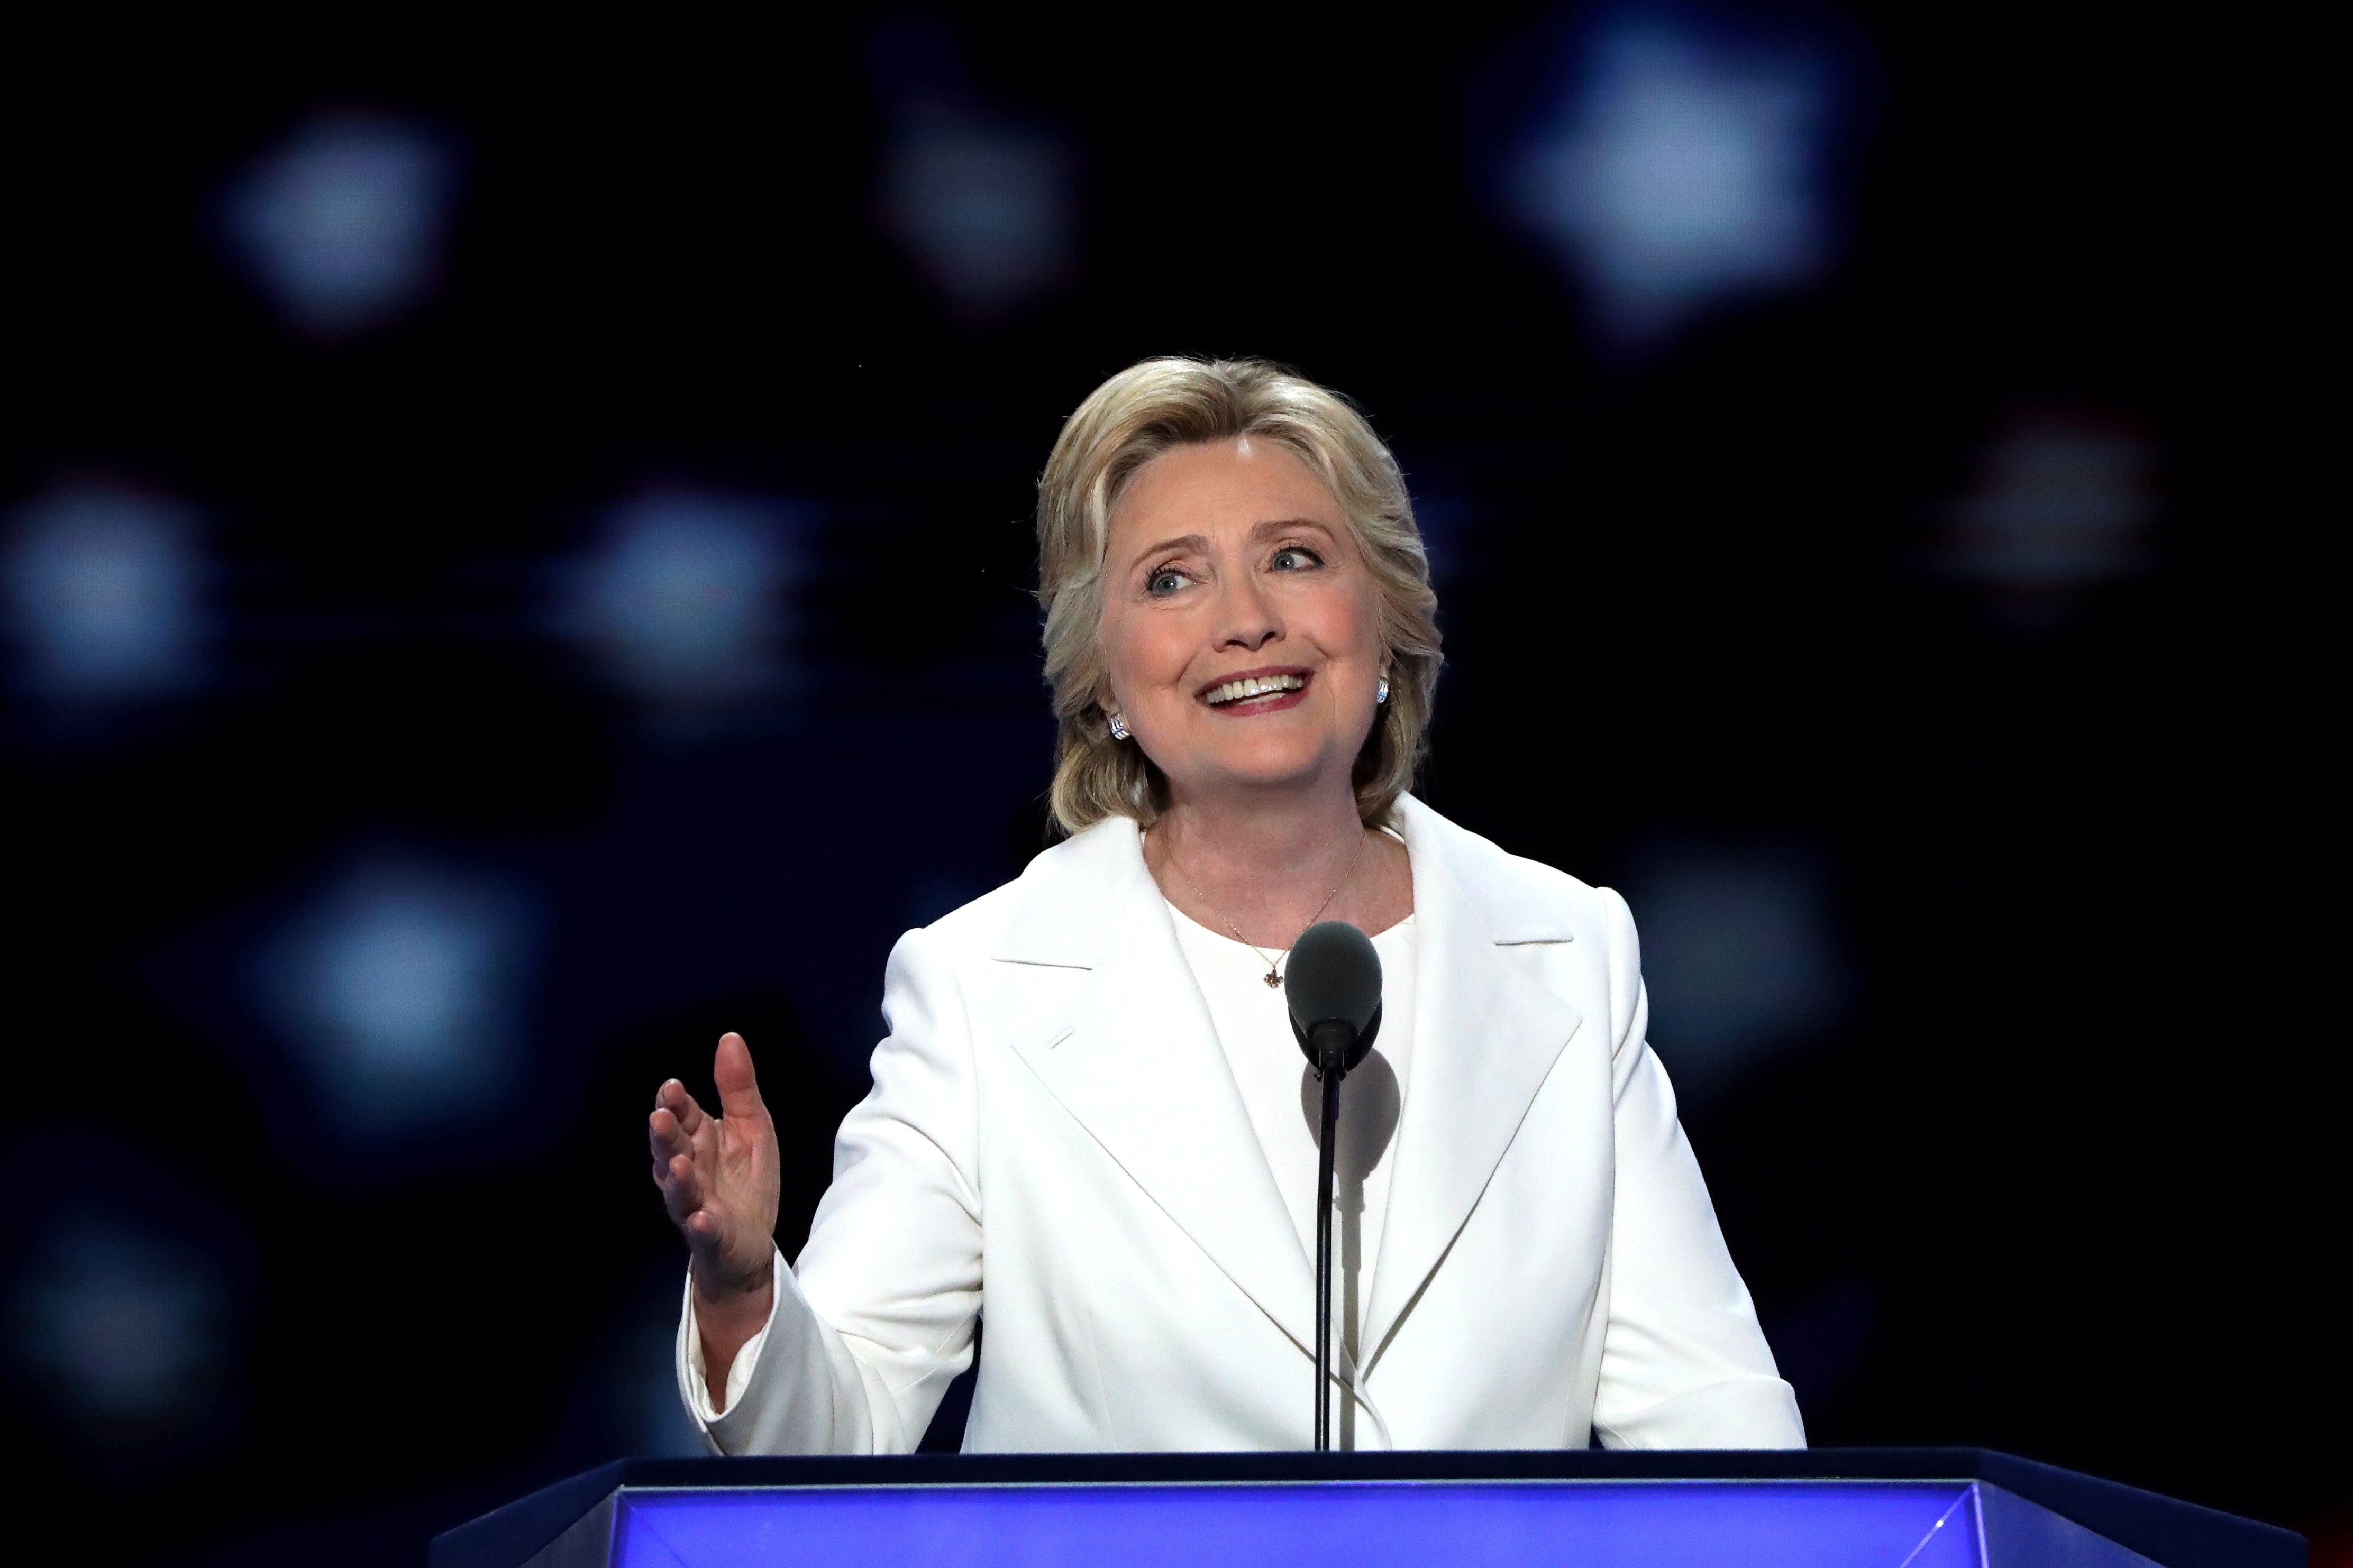 HERstory! Hillary Clinton Accepts Democratic Presidential Nomination